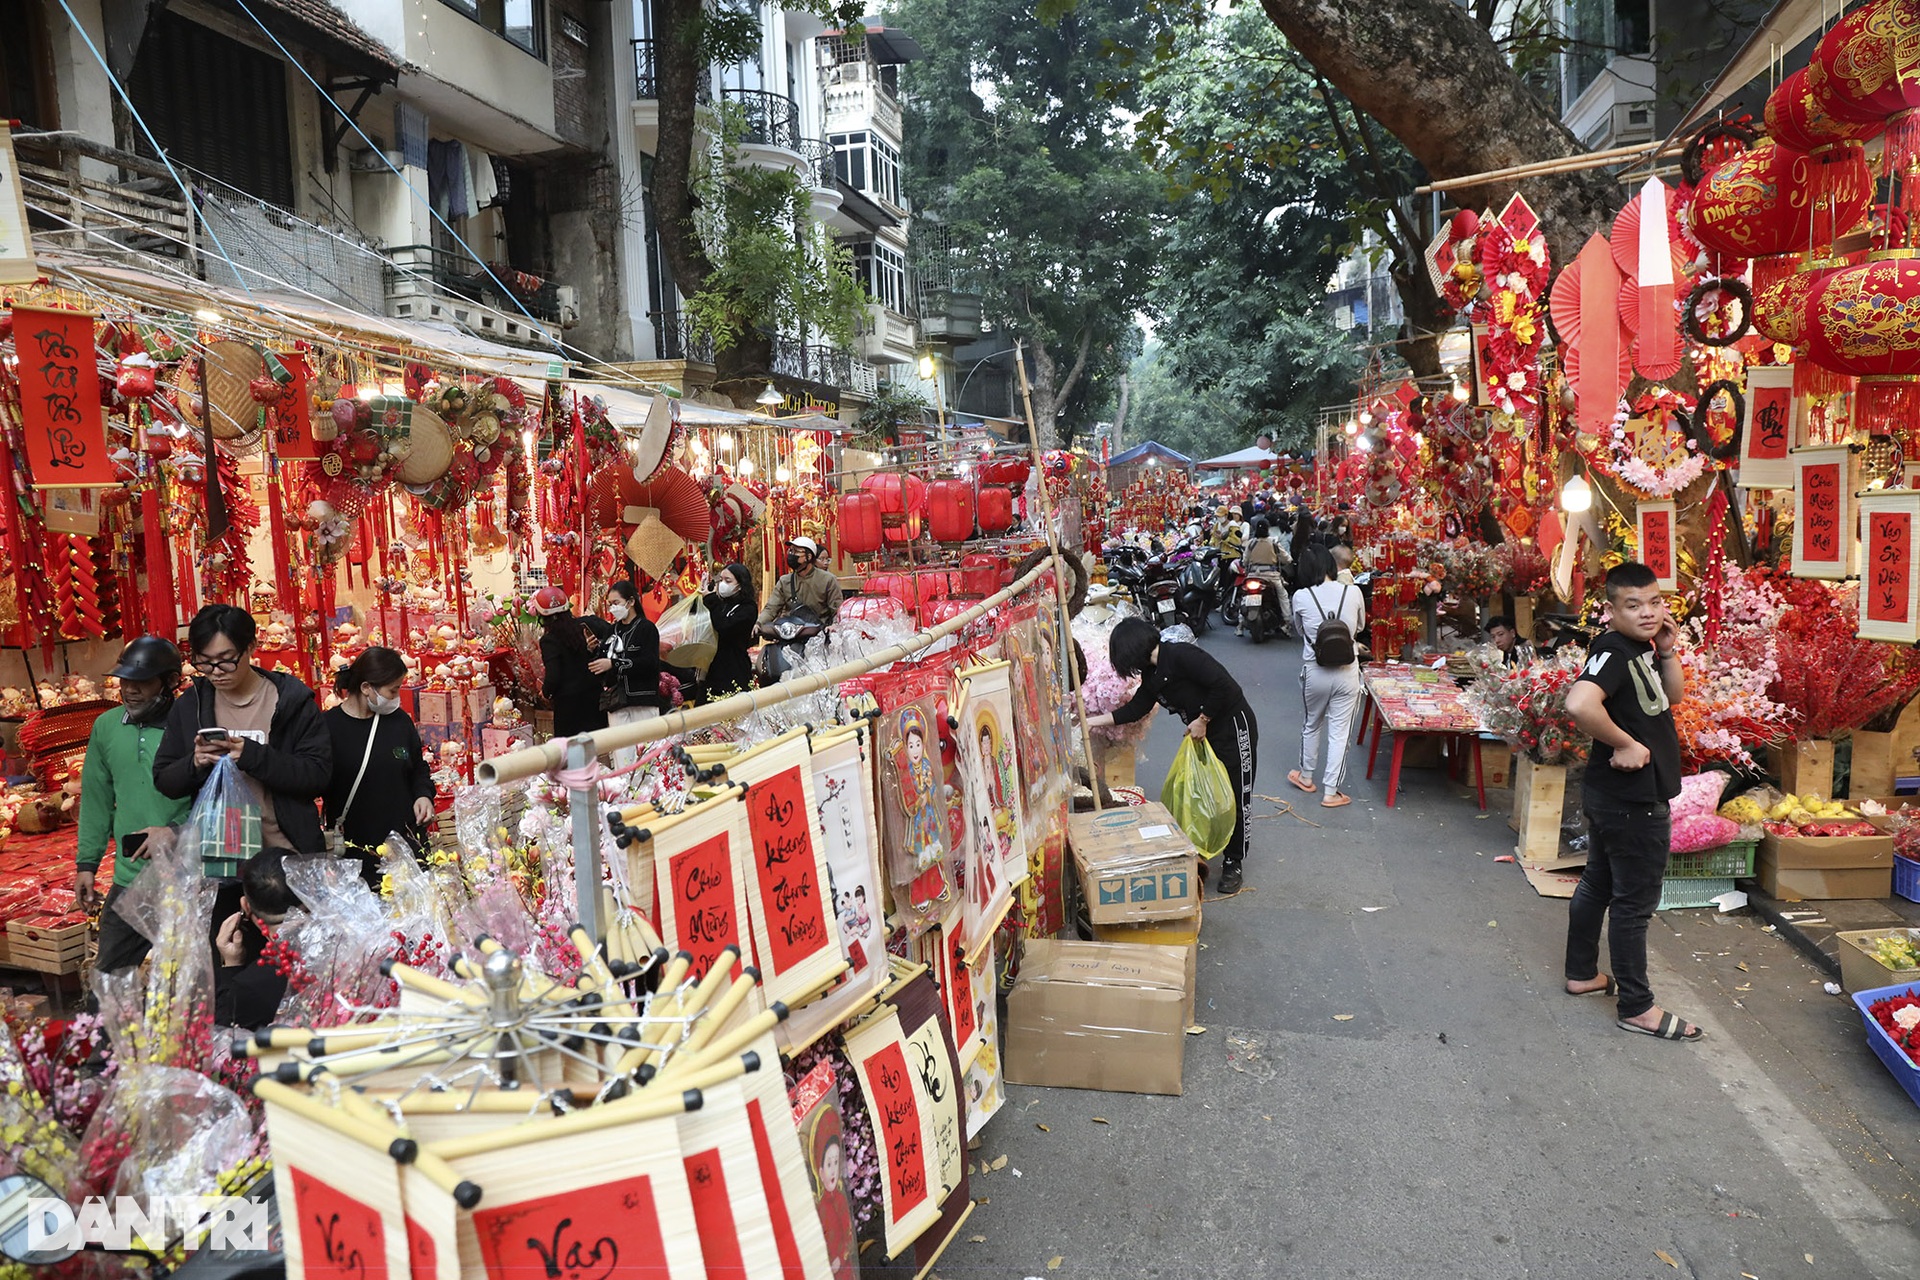 The vibrant flower market meets only once a year - 16